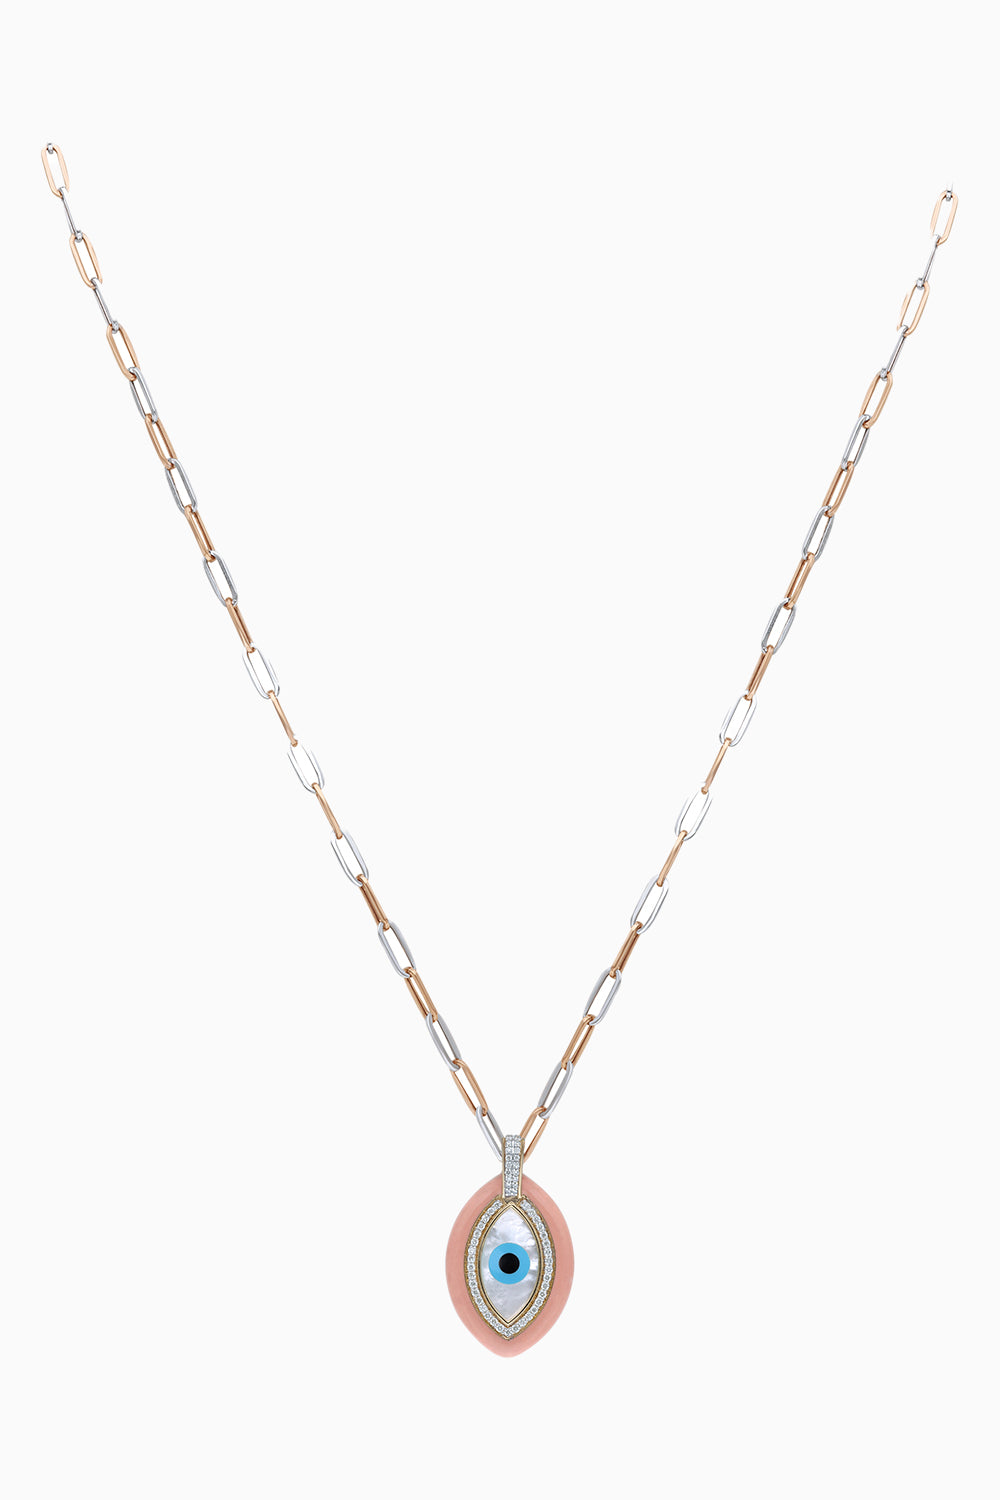 Gold Enamel Evil Eye Pendant with Diamonds and Link Chain